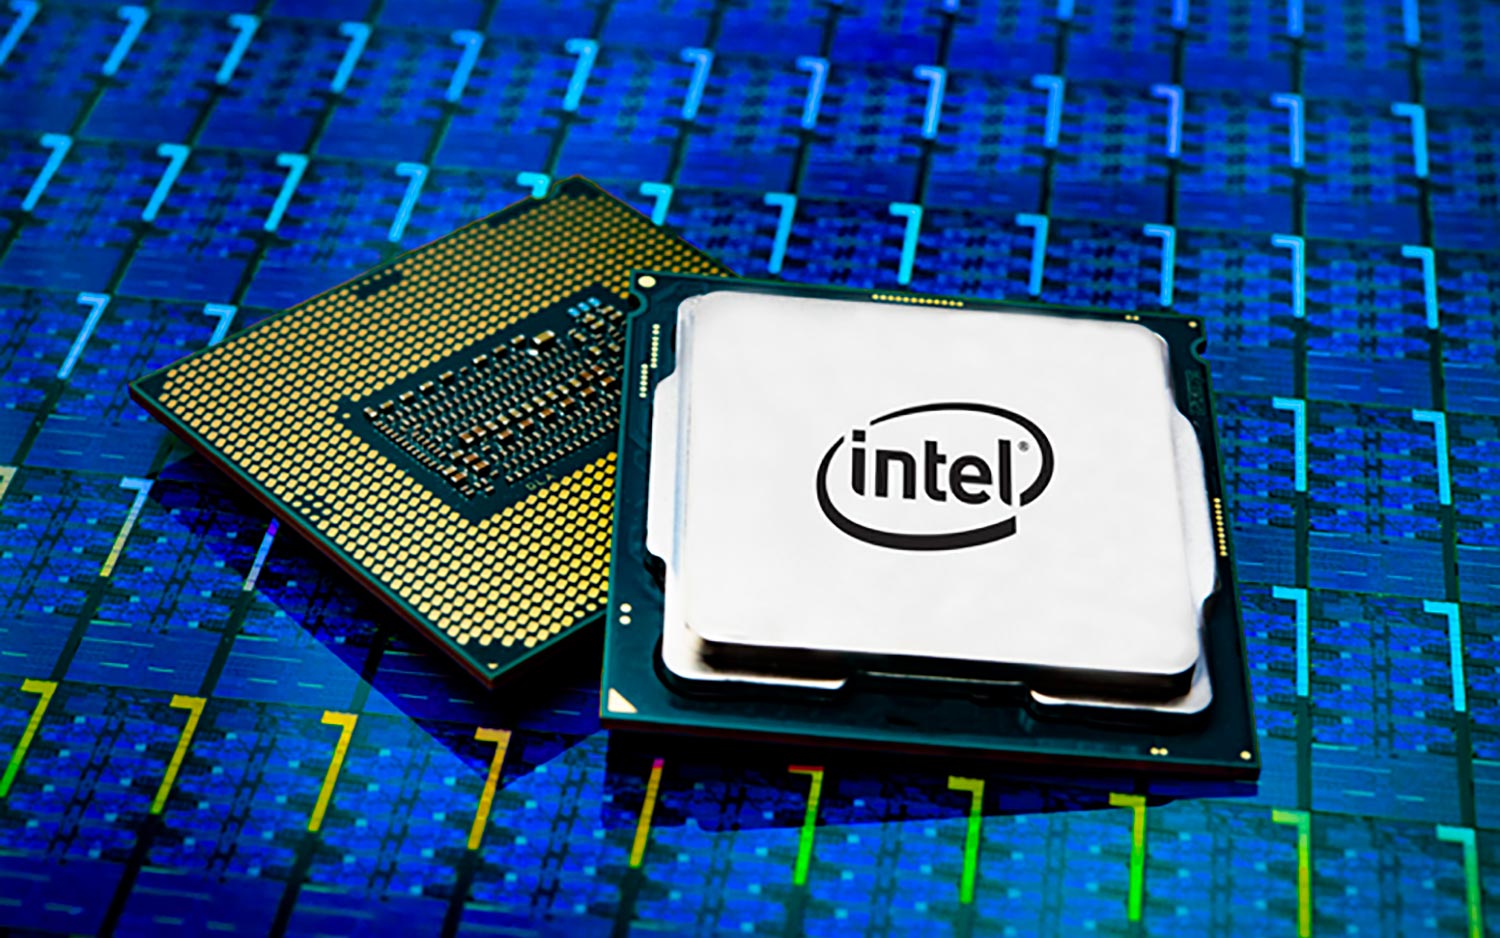 Intel Core i9-9900K Benchmarks: Fastest Gaming CPU Ever, But Not